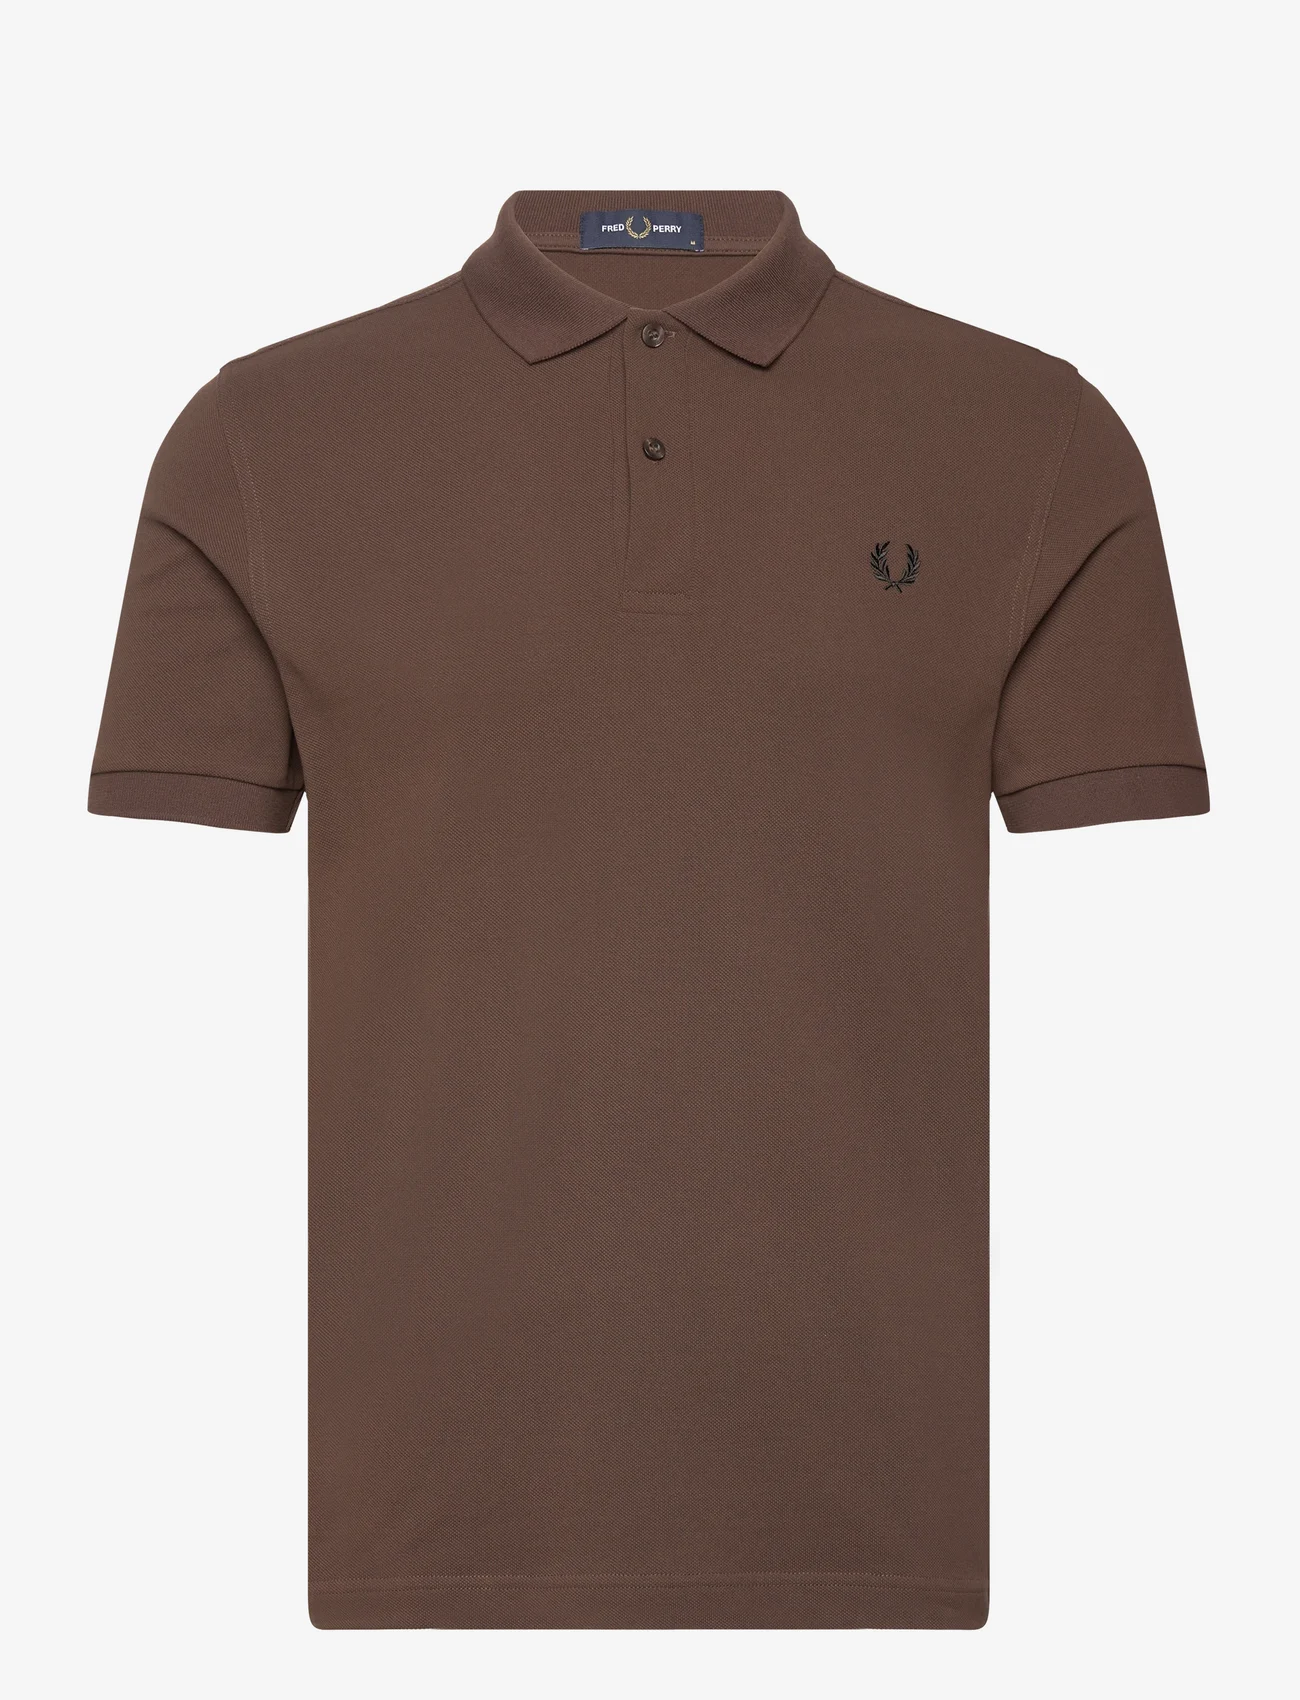 Fred Perry - PLAIN FRED PERRY SHIRT - kortærmede poloer - burnt tobacco - 0